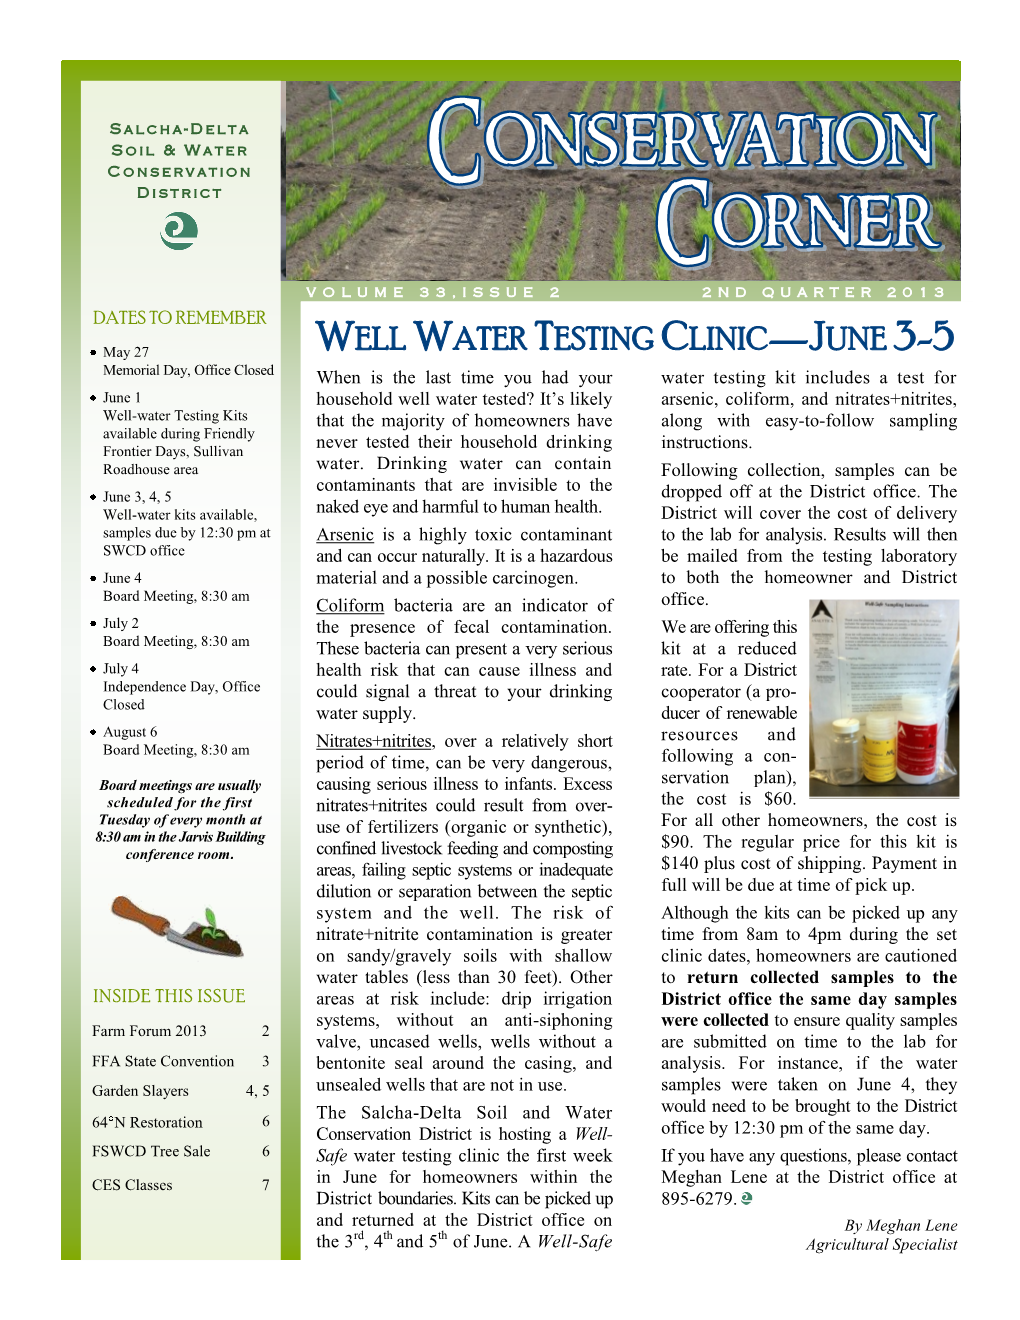 Well Water Testing Clinic—June